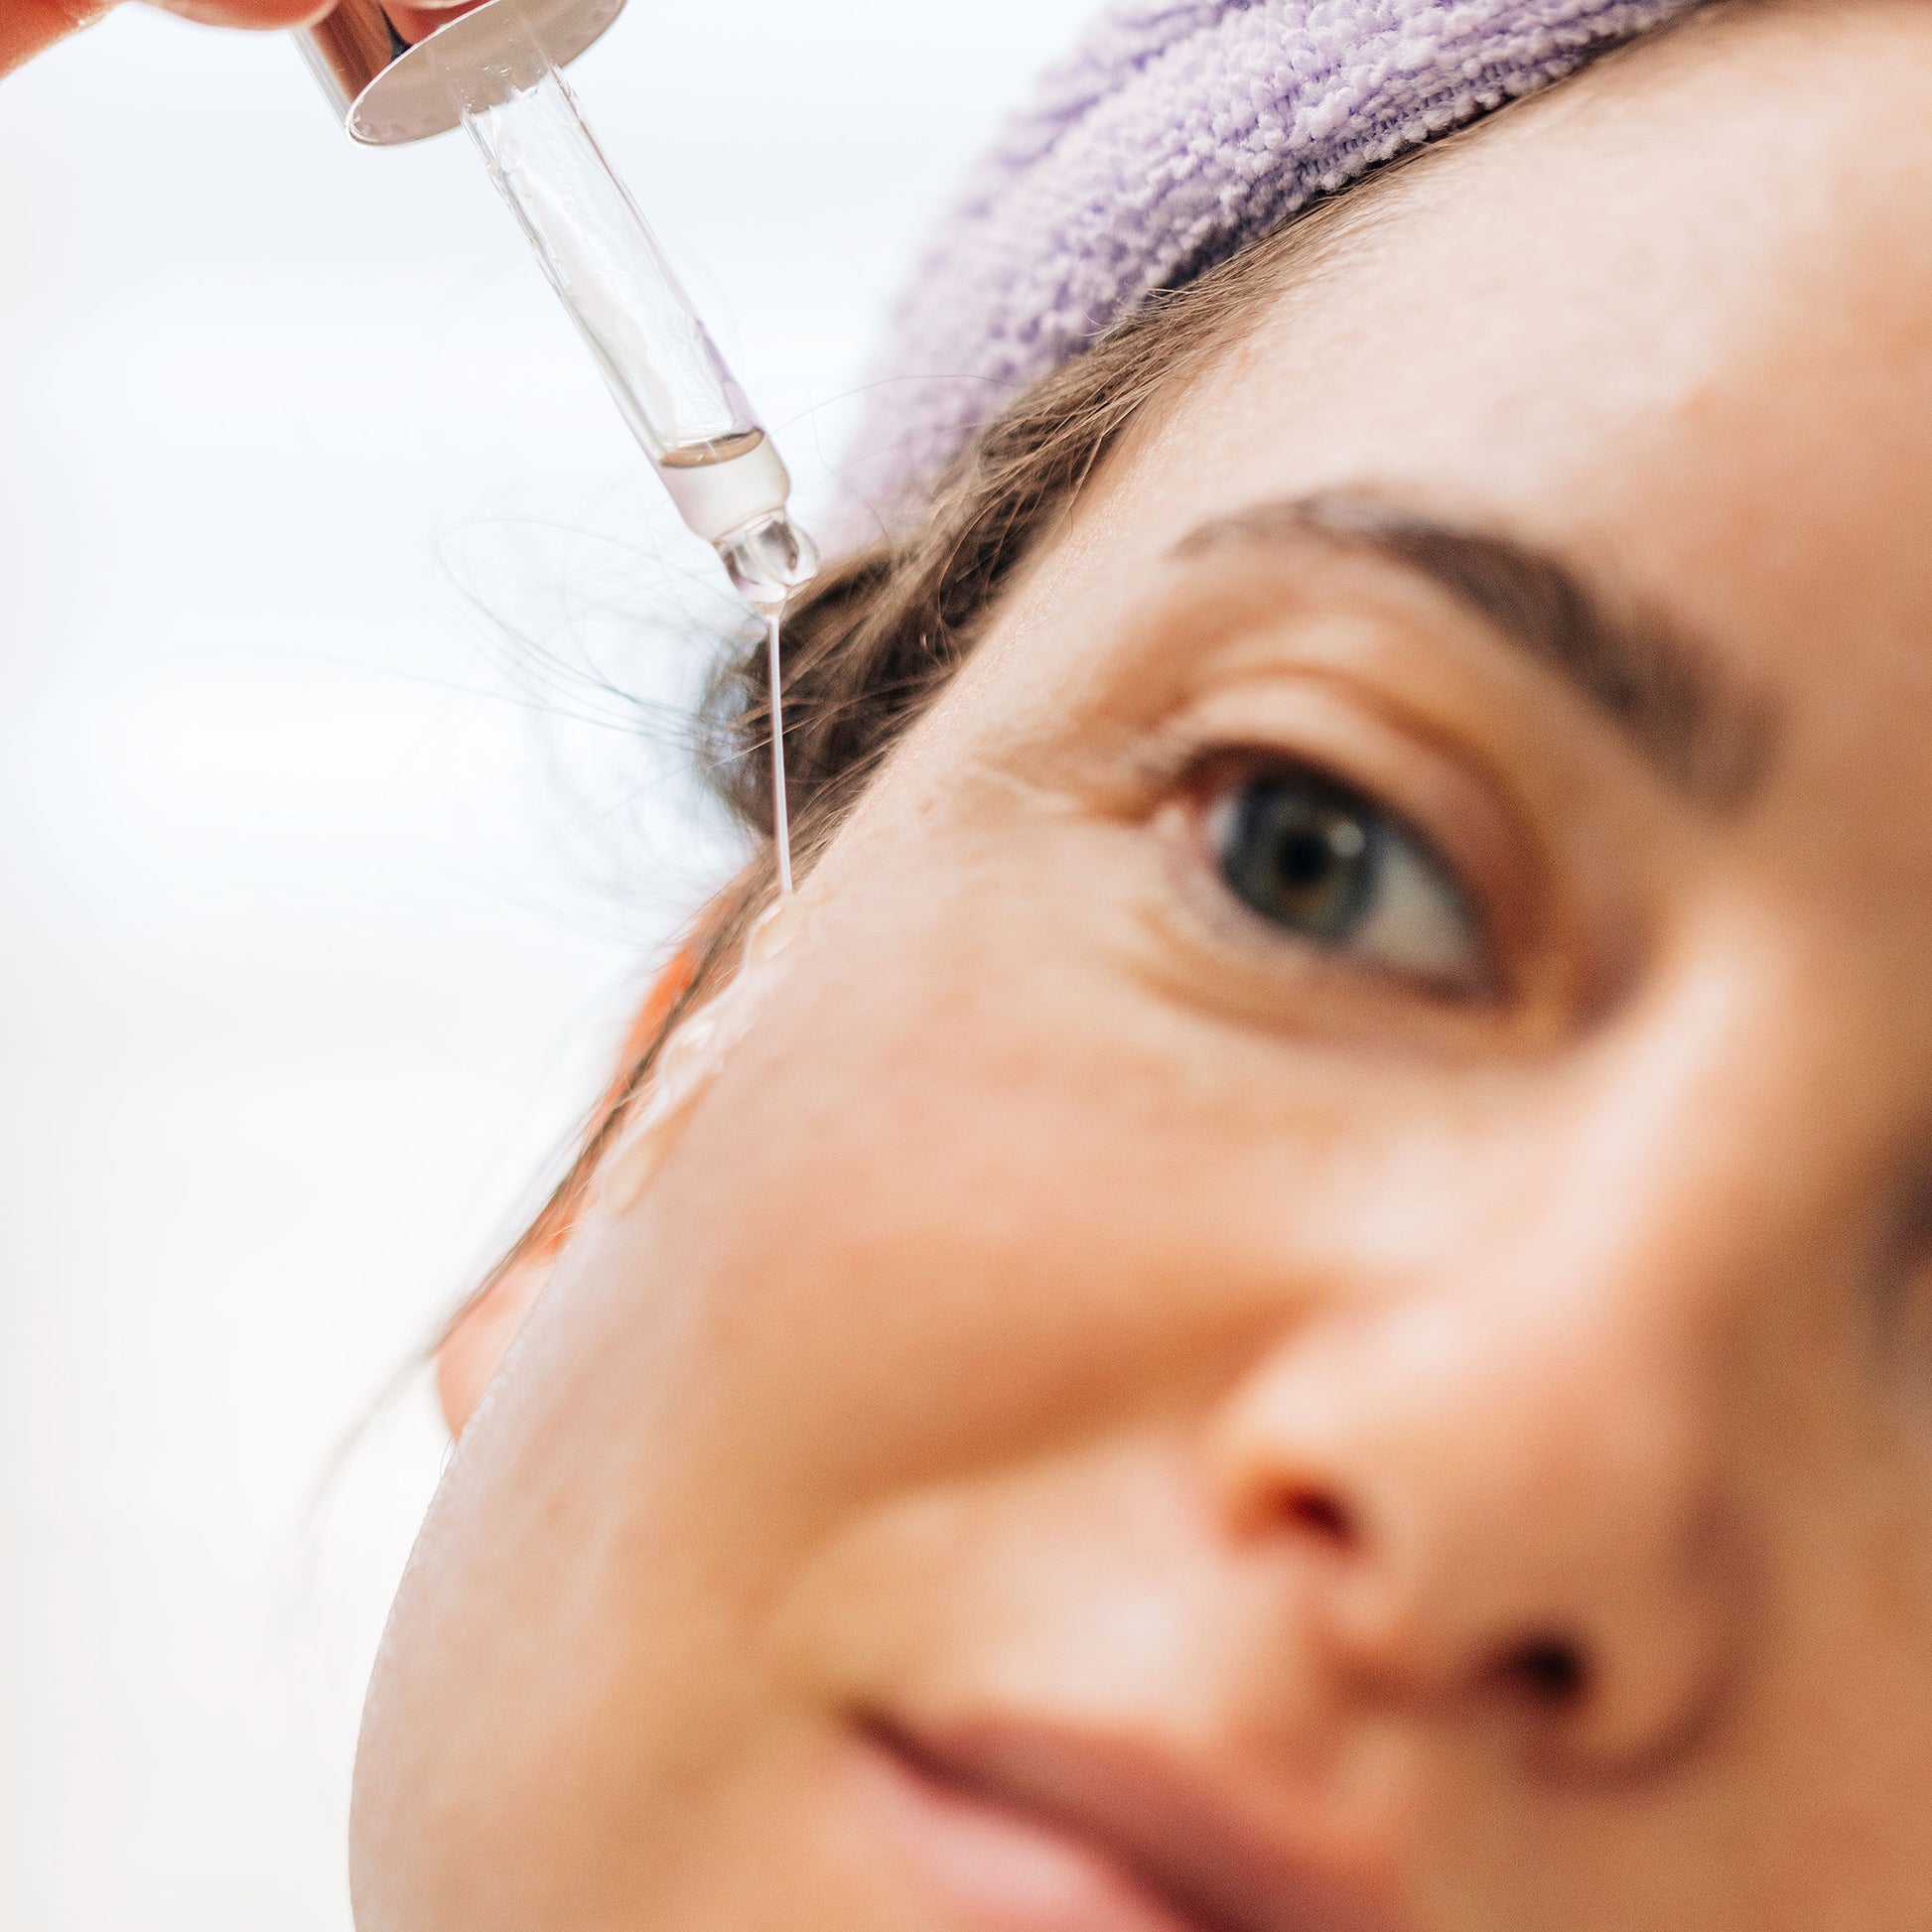 ZO Skin Health's Firming Serum Accelerated being applied to a woman's face